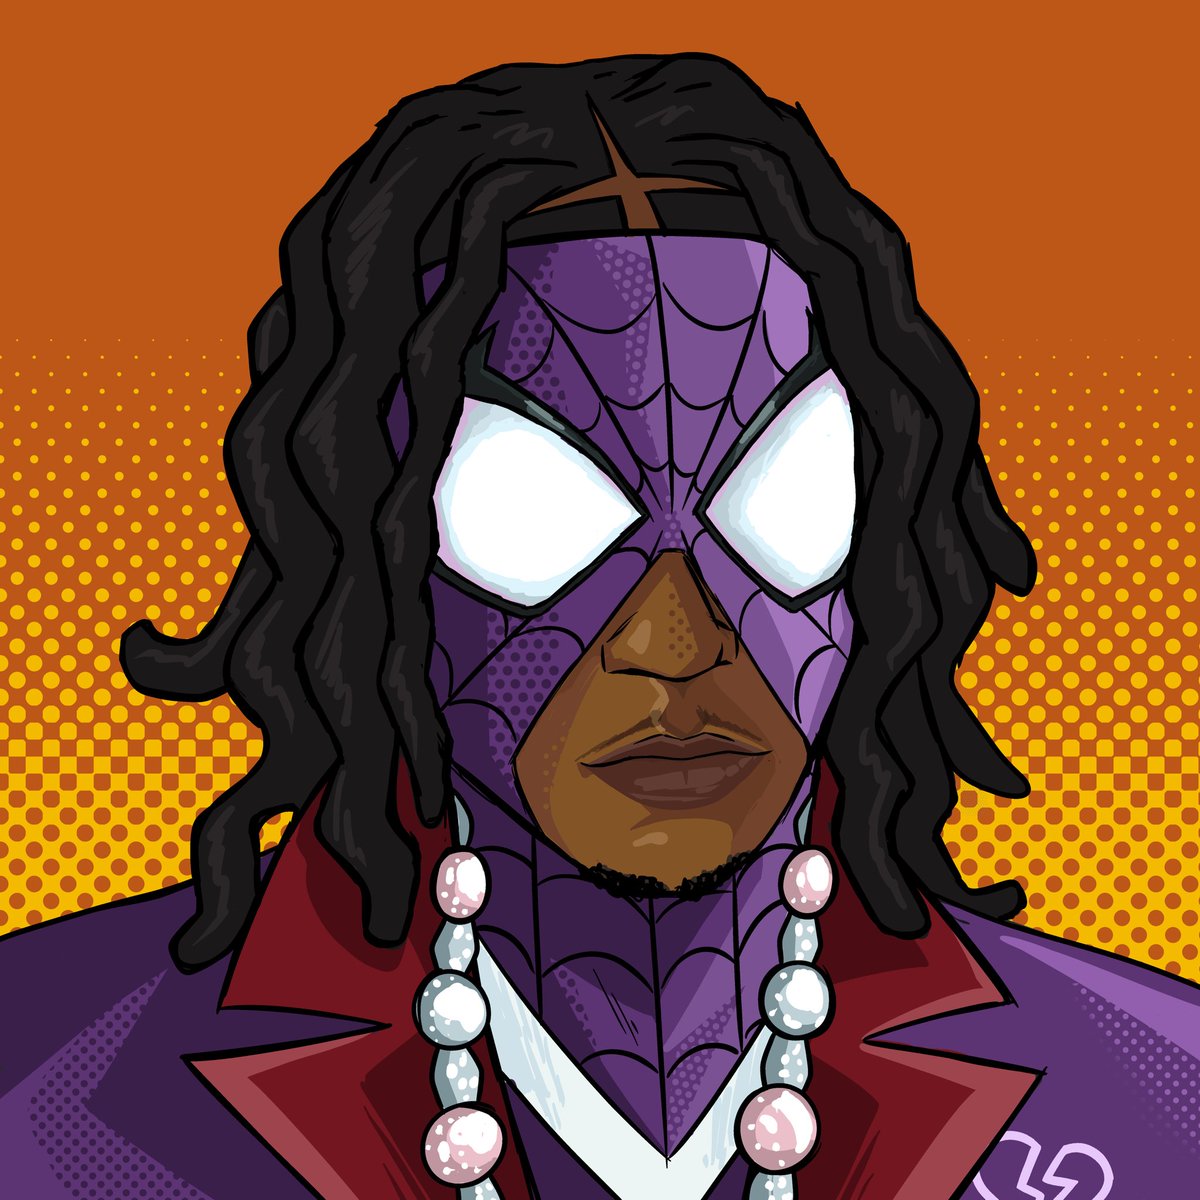 Don Toliver is confirmed for the @SpiderVerse soundtrack available everywhere June 2nd!! 🕷️🕸️❤️‍🔥
@DonToliver